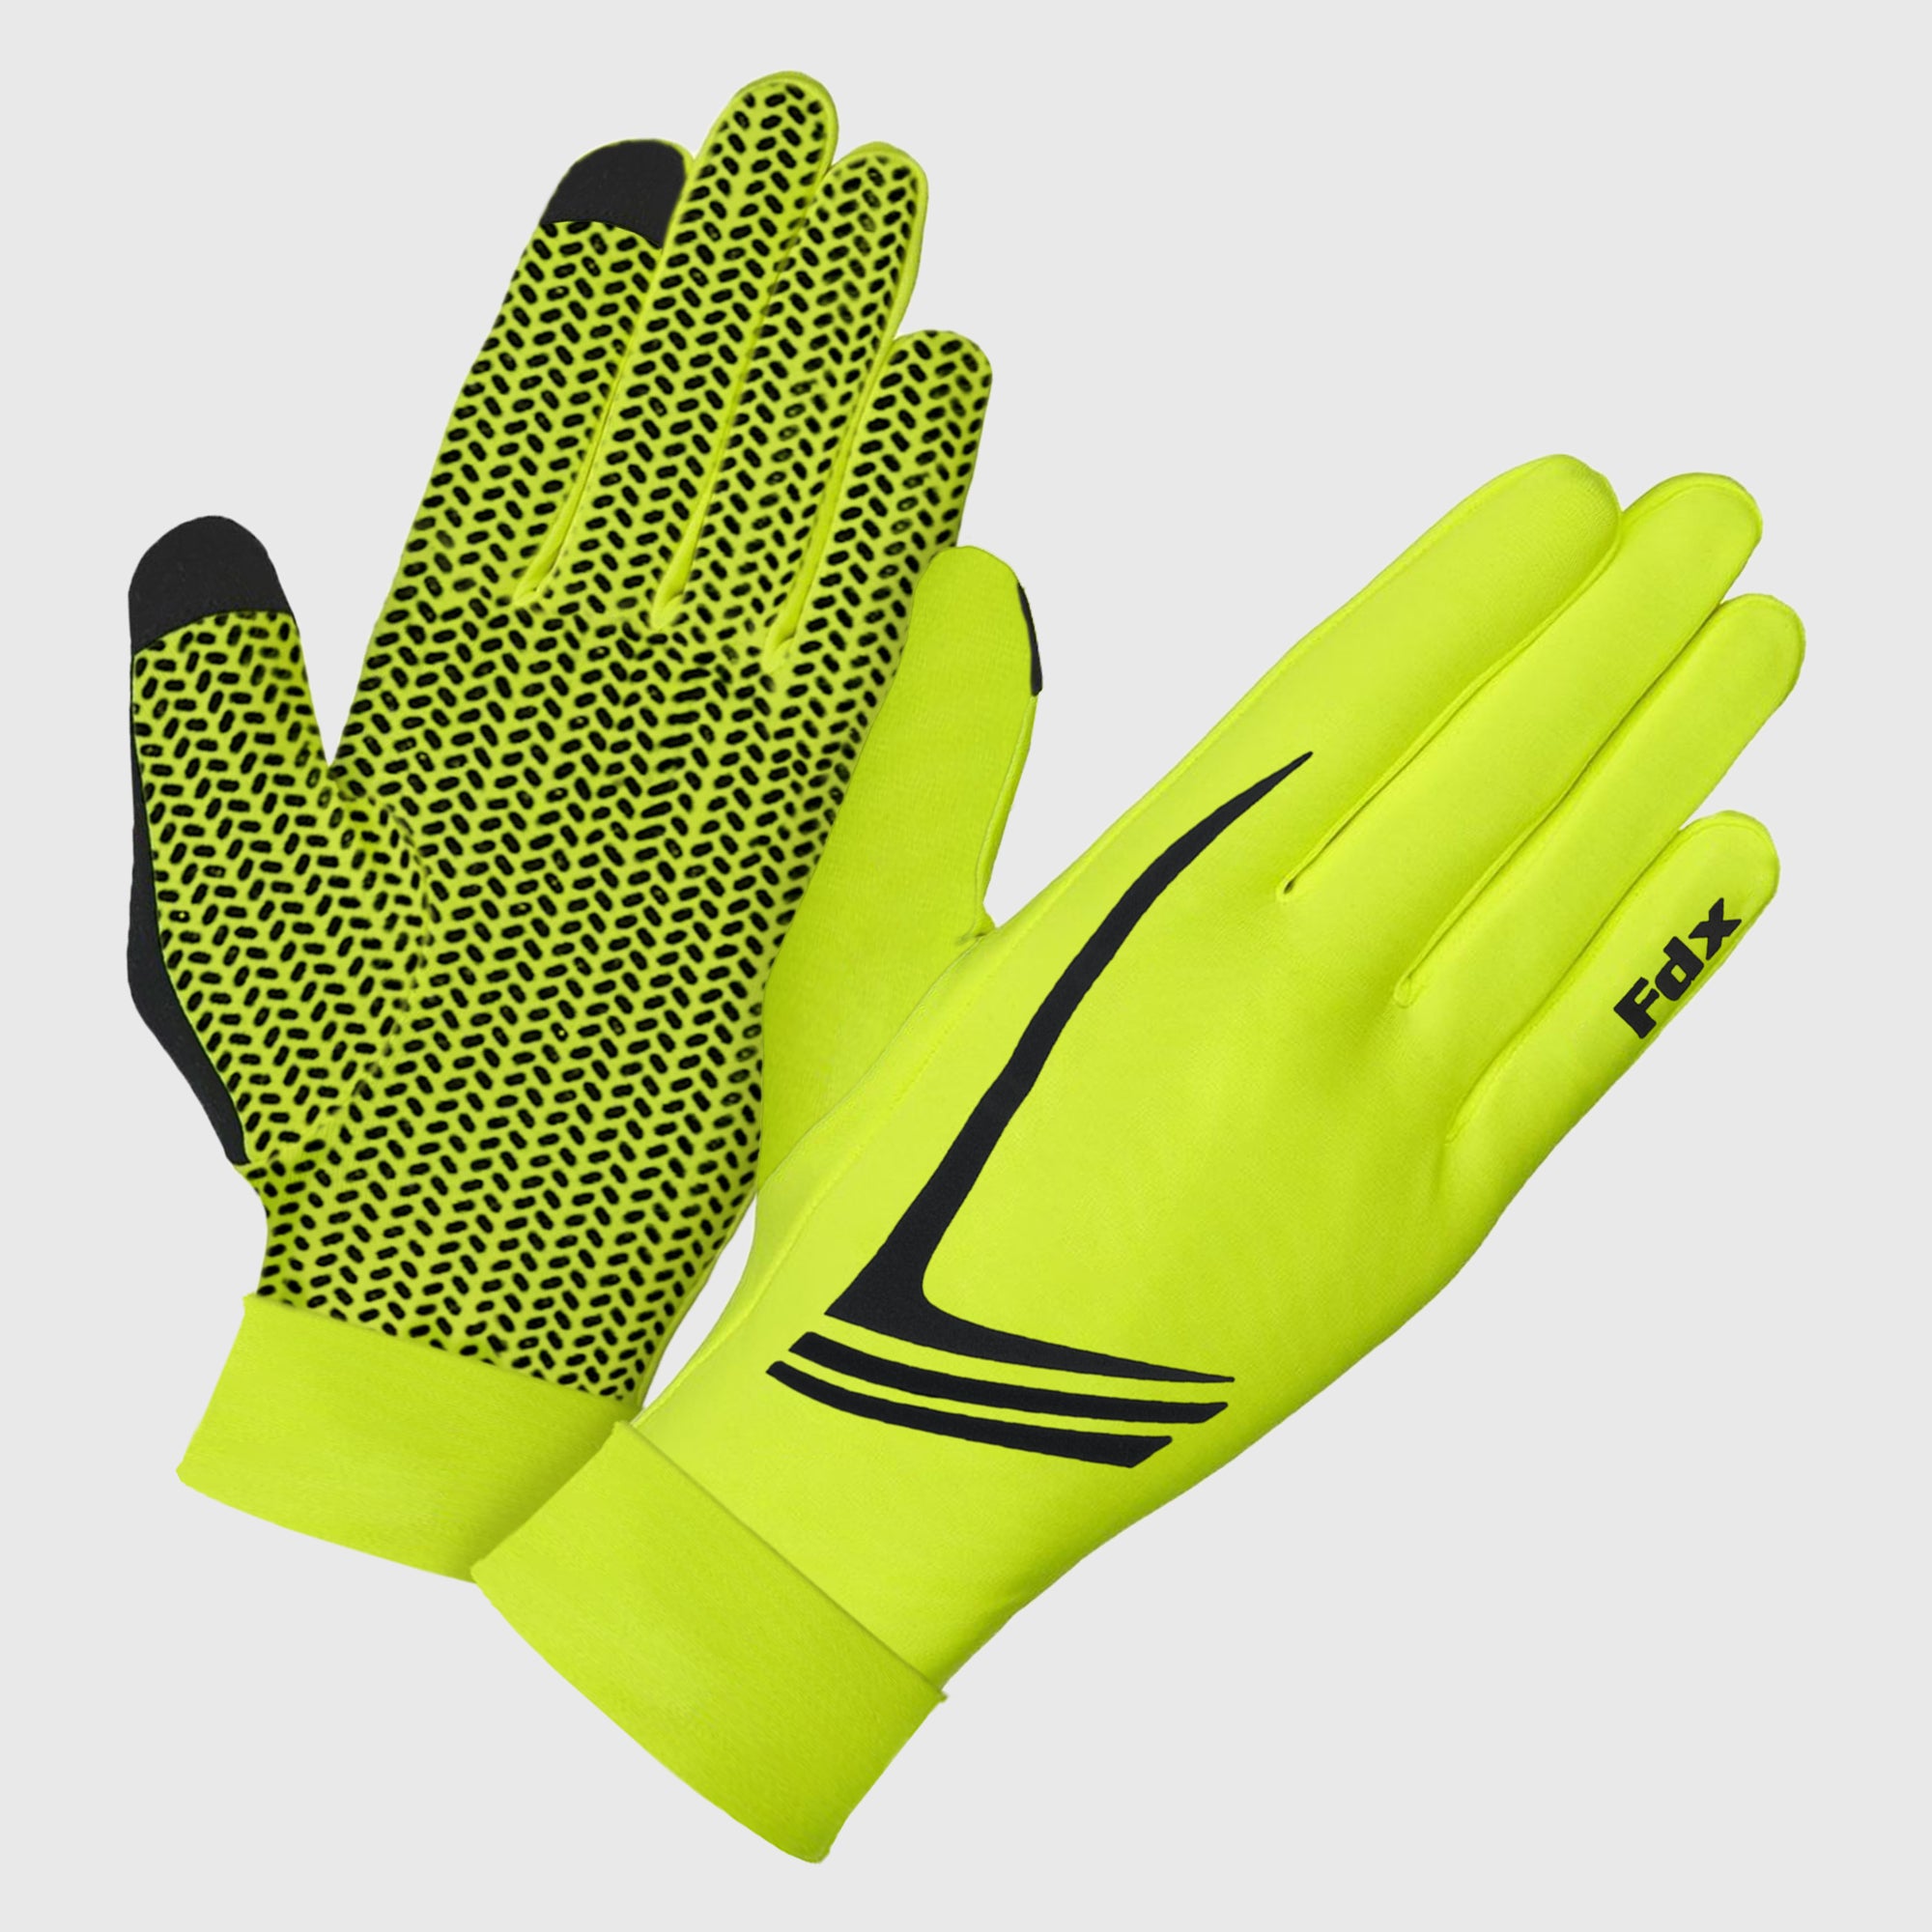 FDX Aero Yellow Full Finger Winter Cycling Gloves Gel padded Silicon Gripper Anti Slip Reflective Details Long Cuffs UK